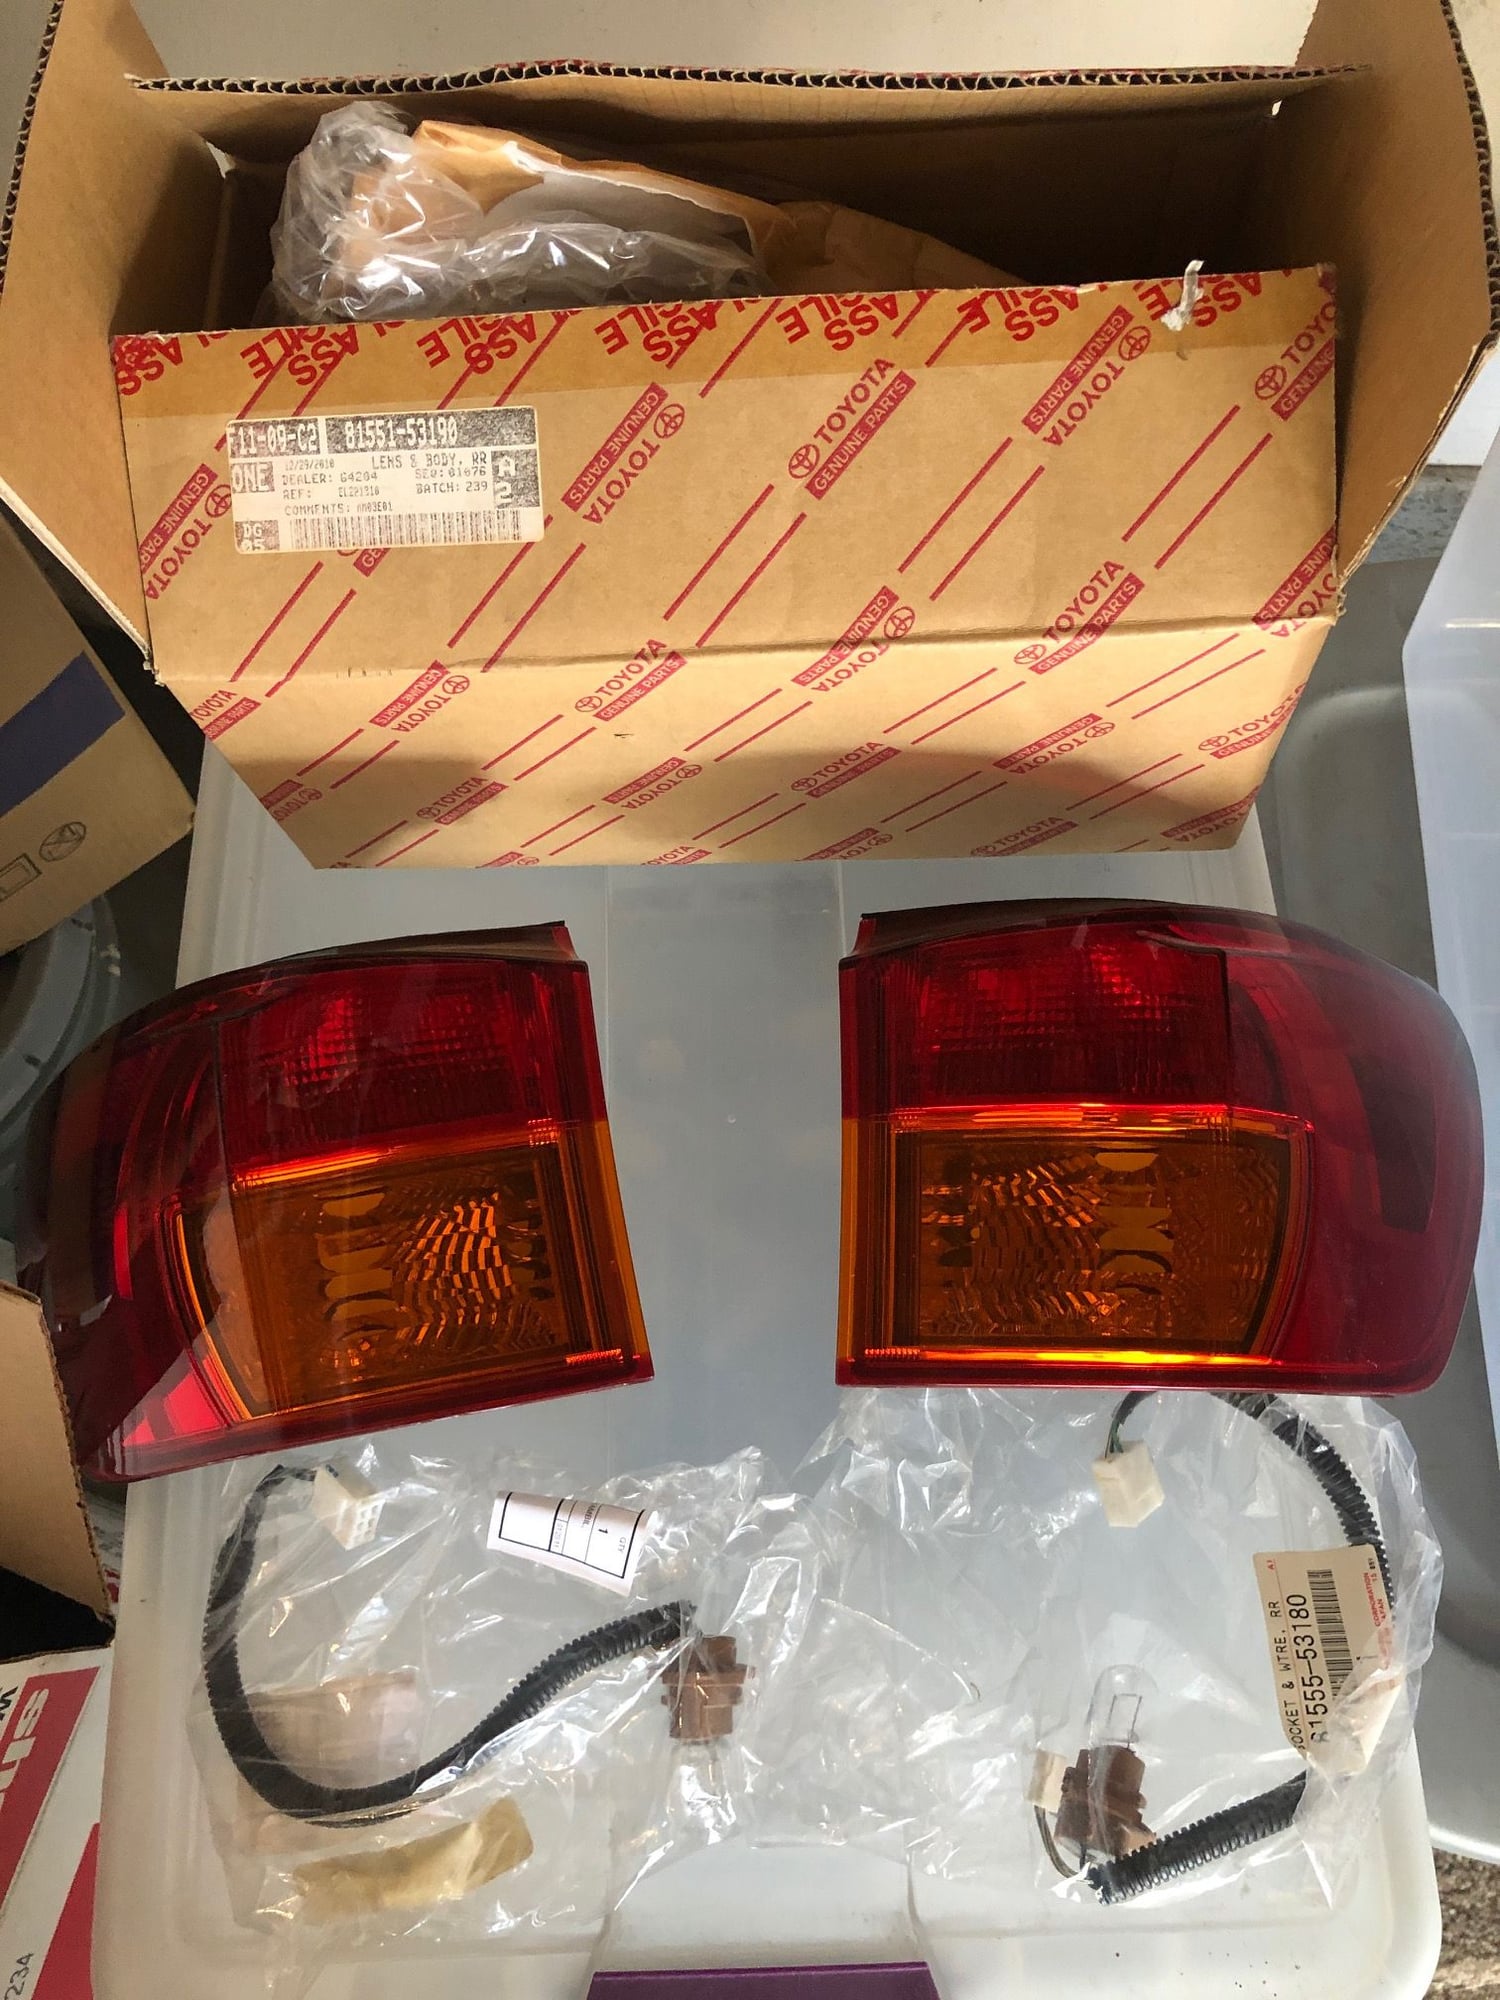 Lights - FS: 06-08 Outer tail lights - Used - 2006 to 2008 Lexus IS250 - 2006 to 2008 Lexus IS350 - San Diego, CA 92108, United States